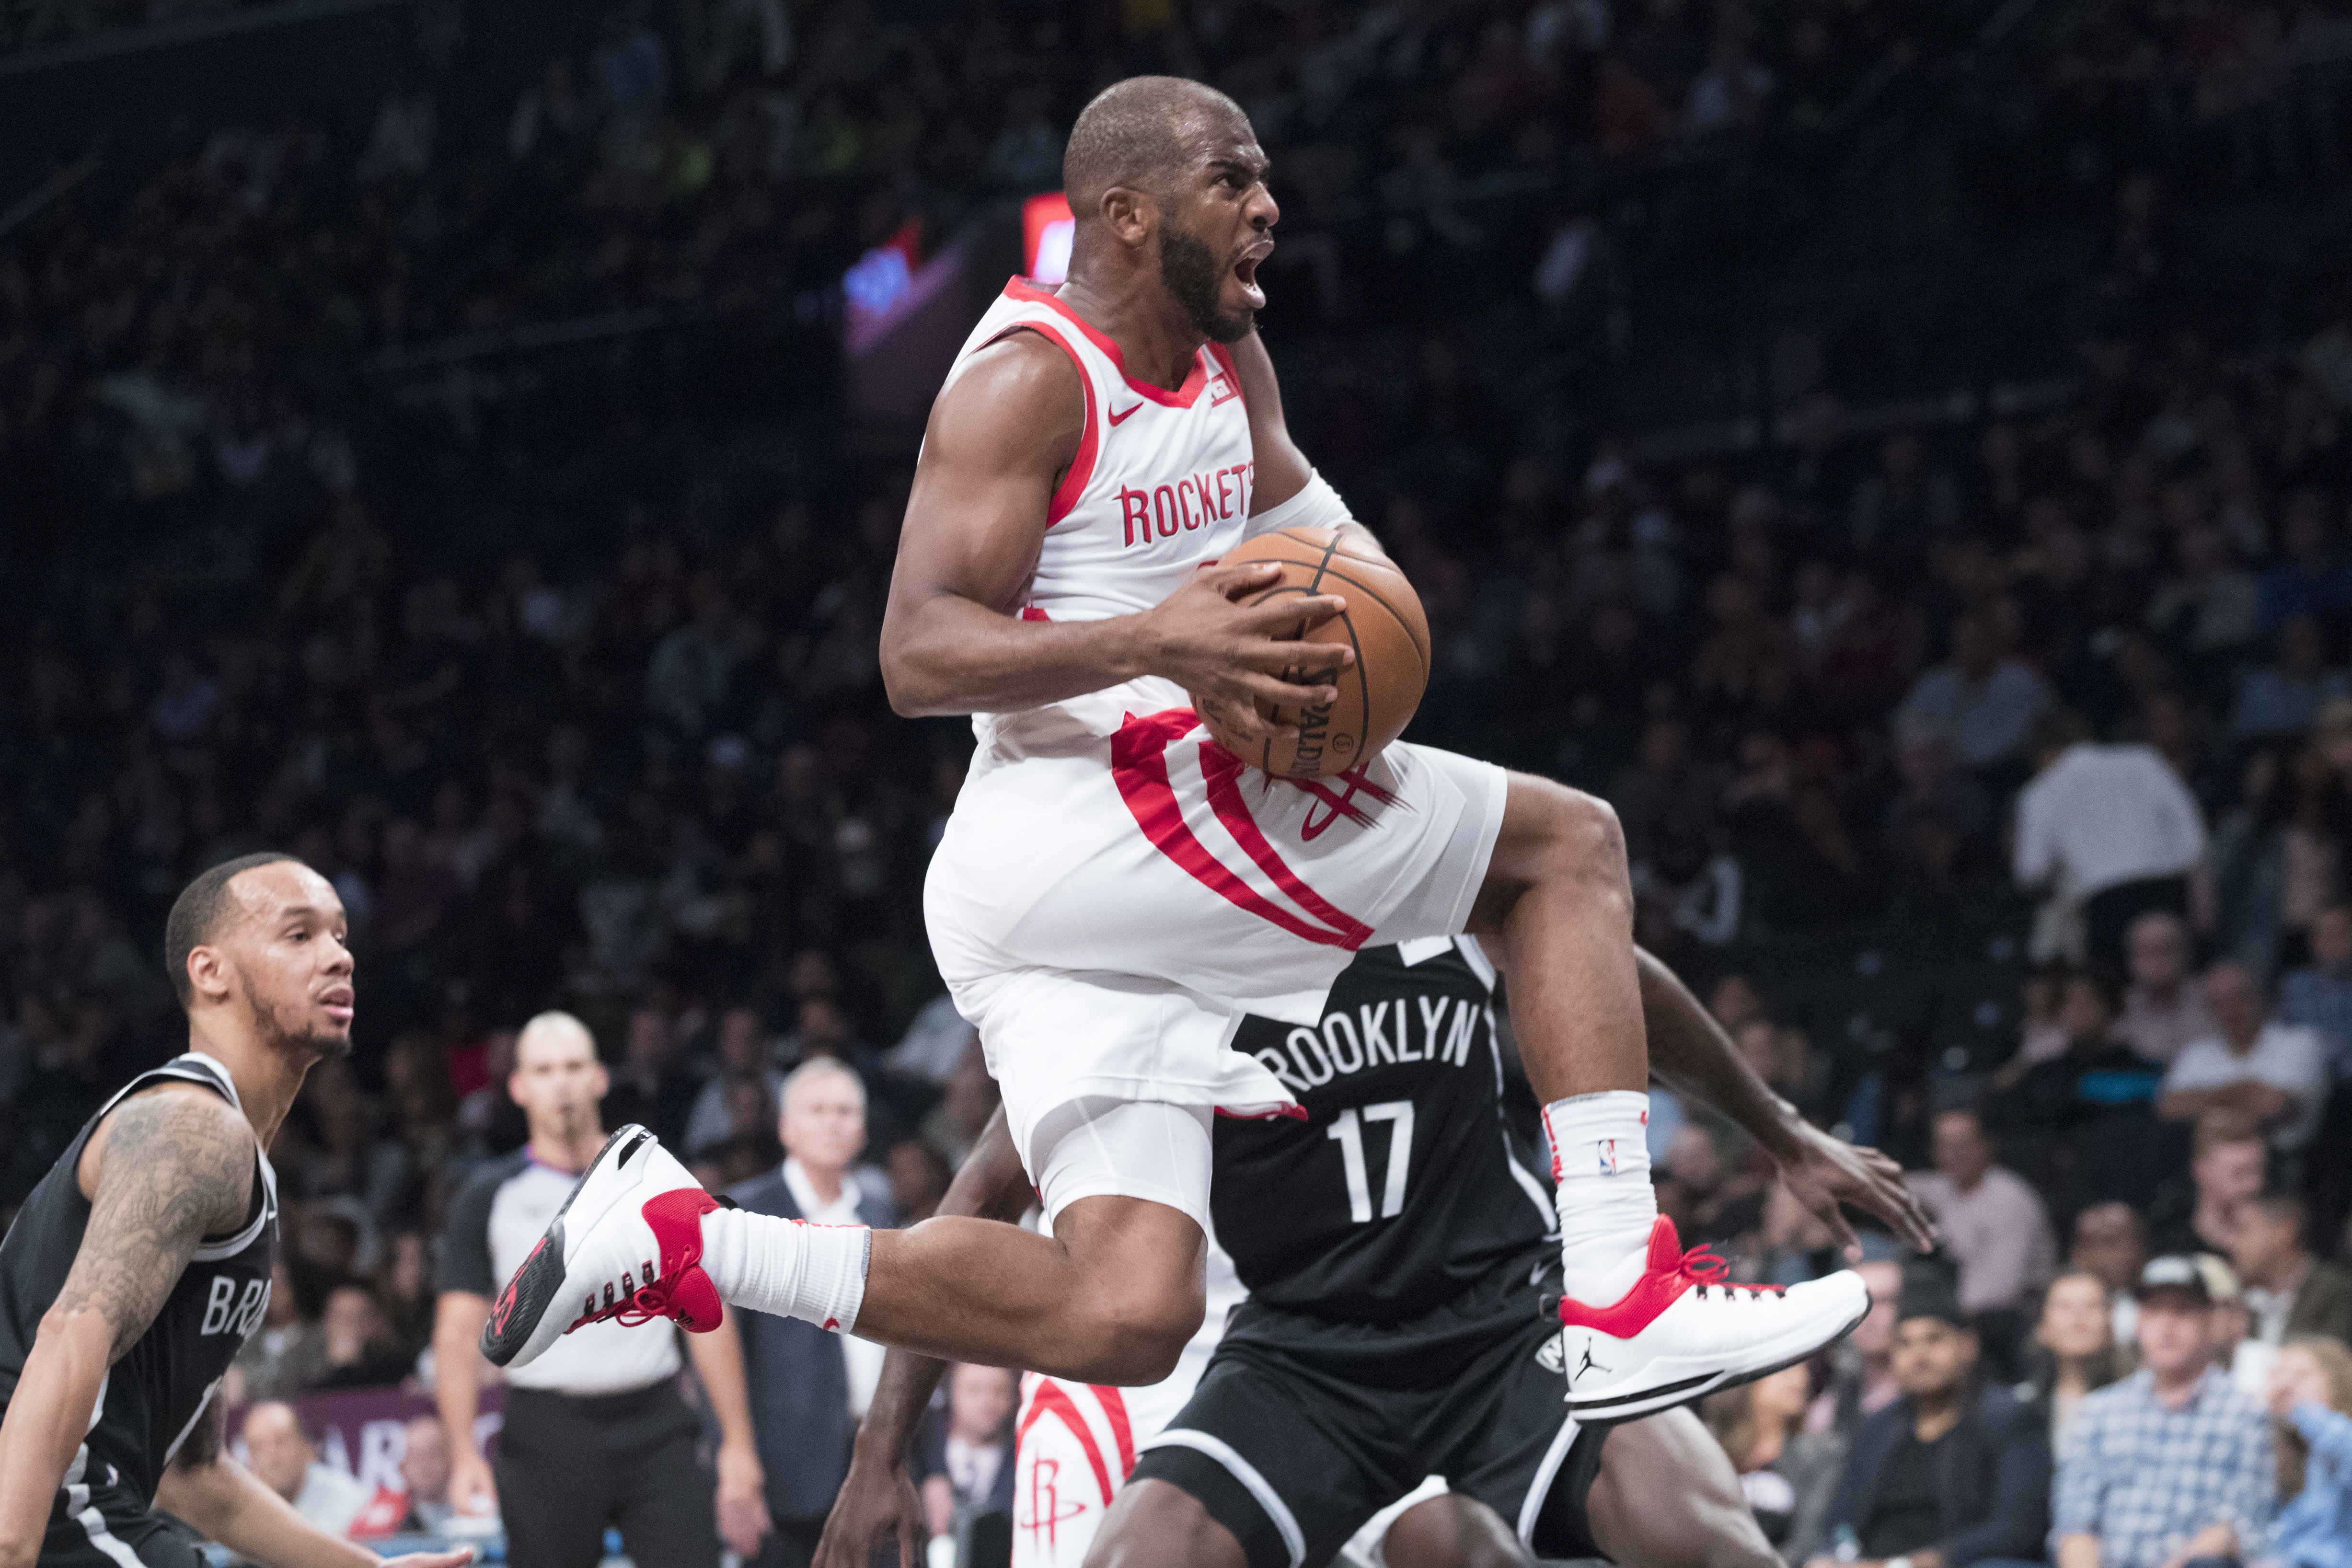 Paul, Anthony help Rockets top Nets 119-111, end 4-game skid